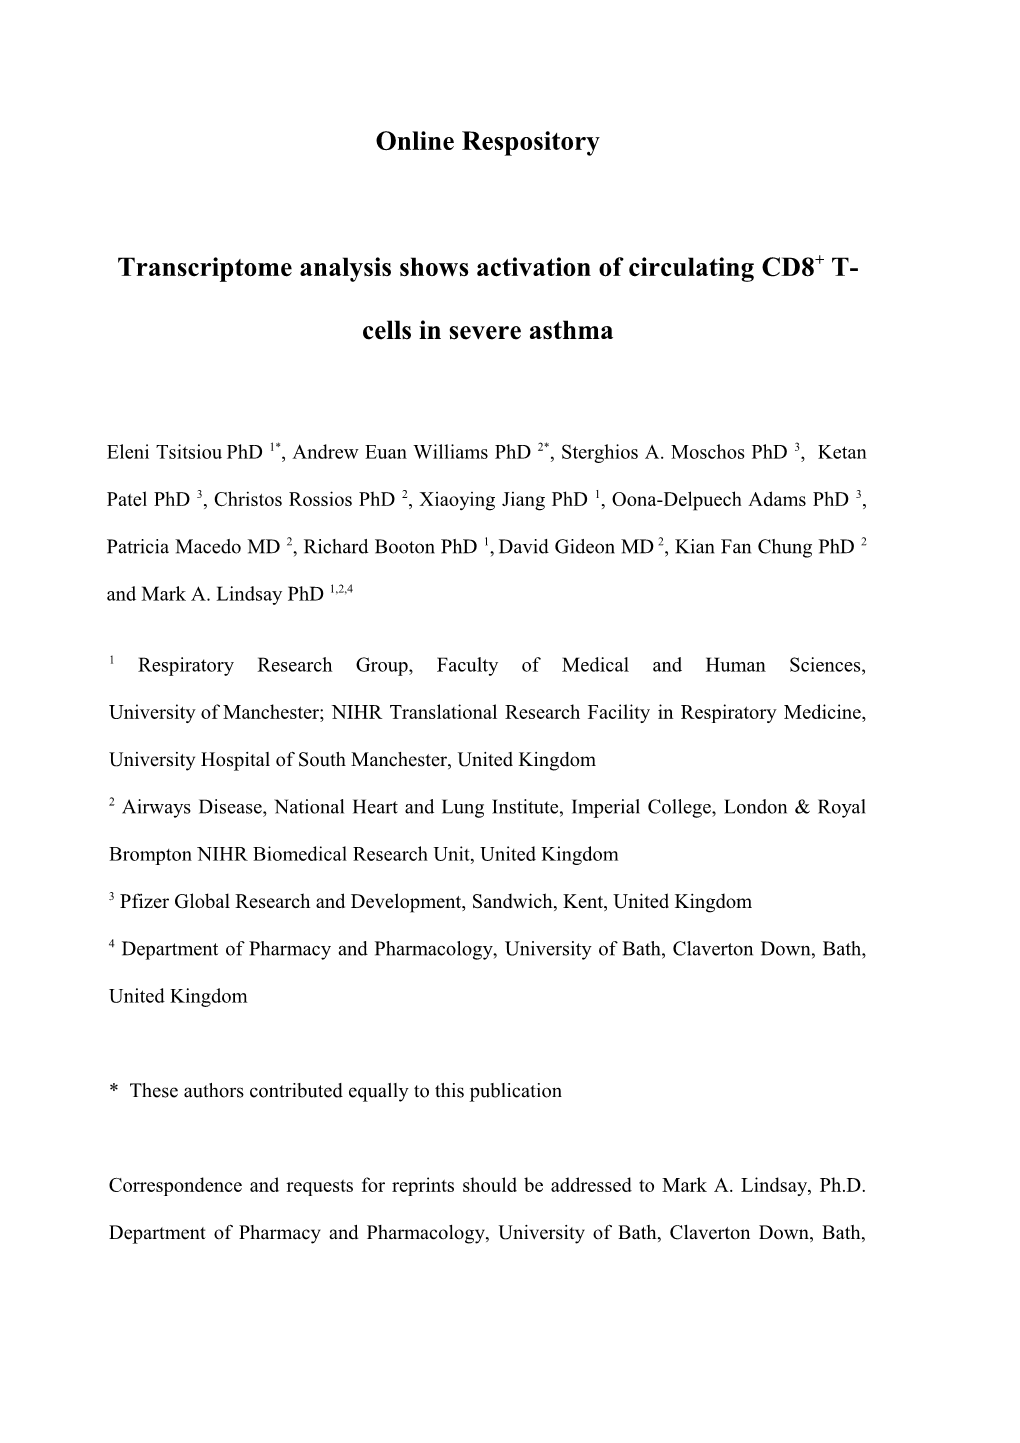 Transcriptome Analysis Shows Activation of Circulating CD8+ T-Cells in Severe Asthma